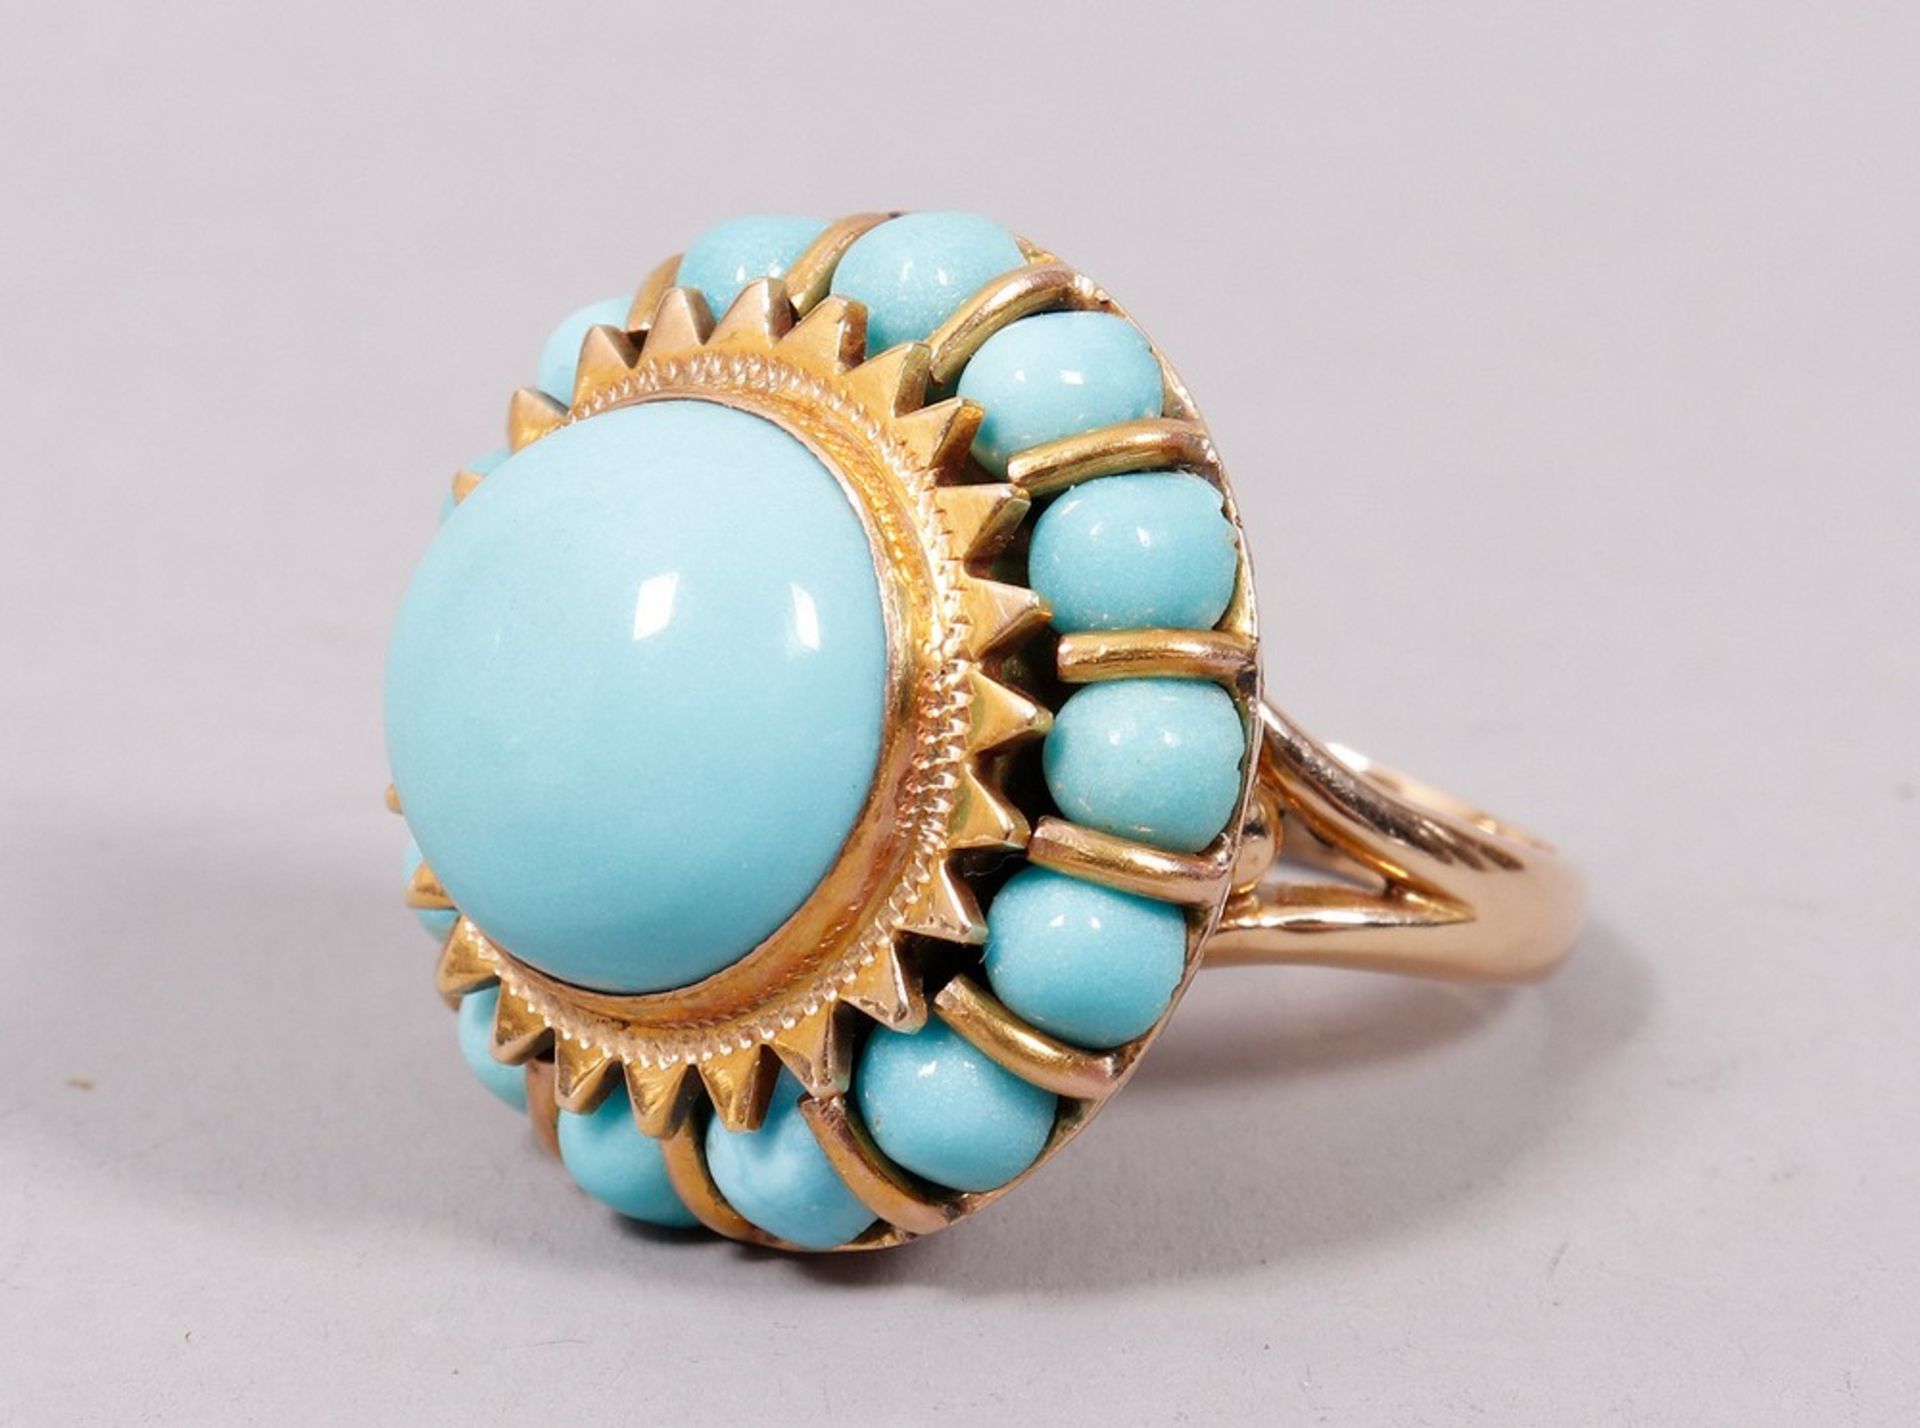 Antique ring with probably Iranian turquoise, 585 gold - Image 3 of 5